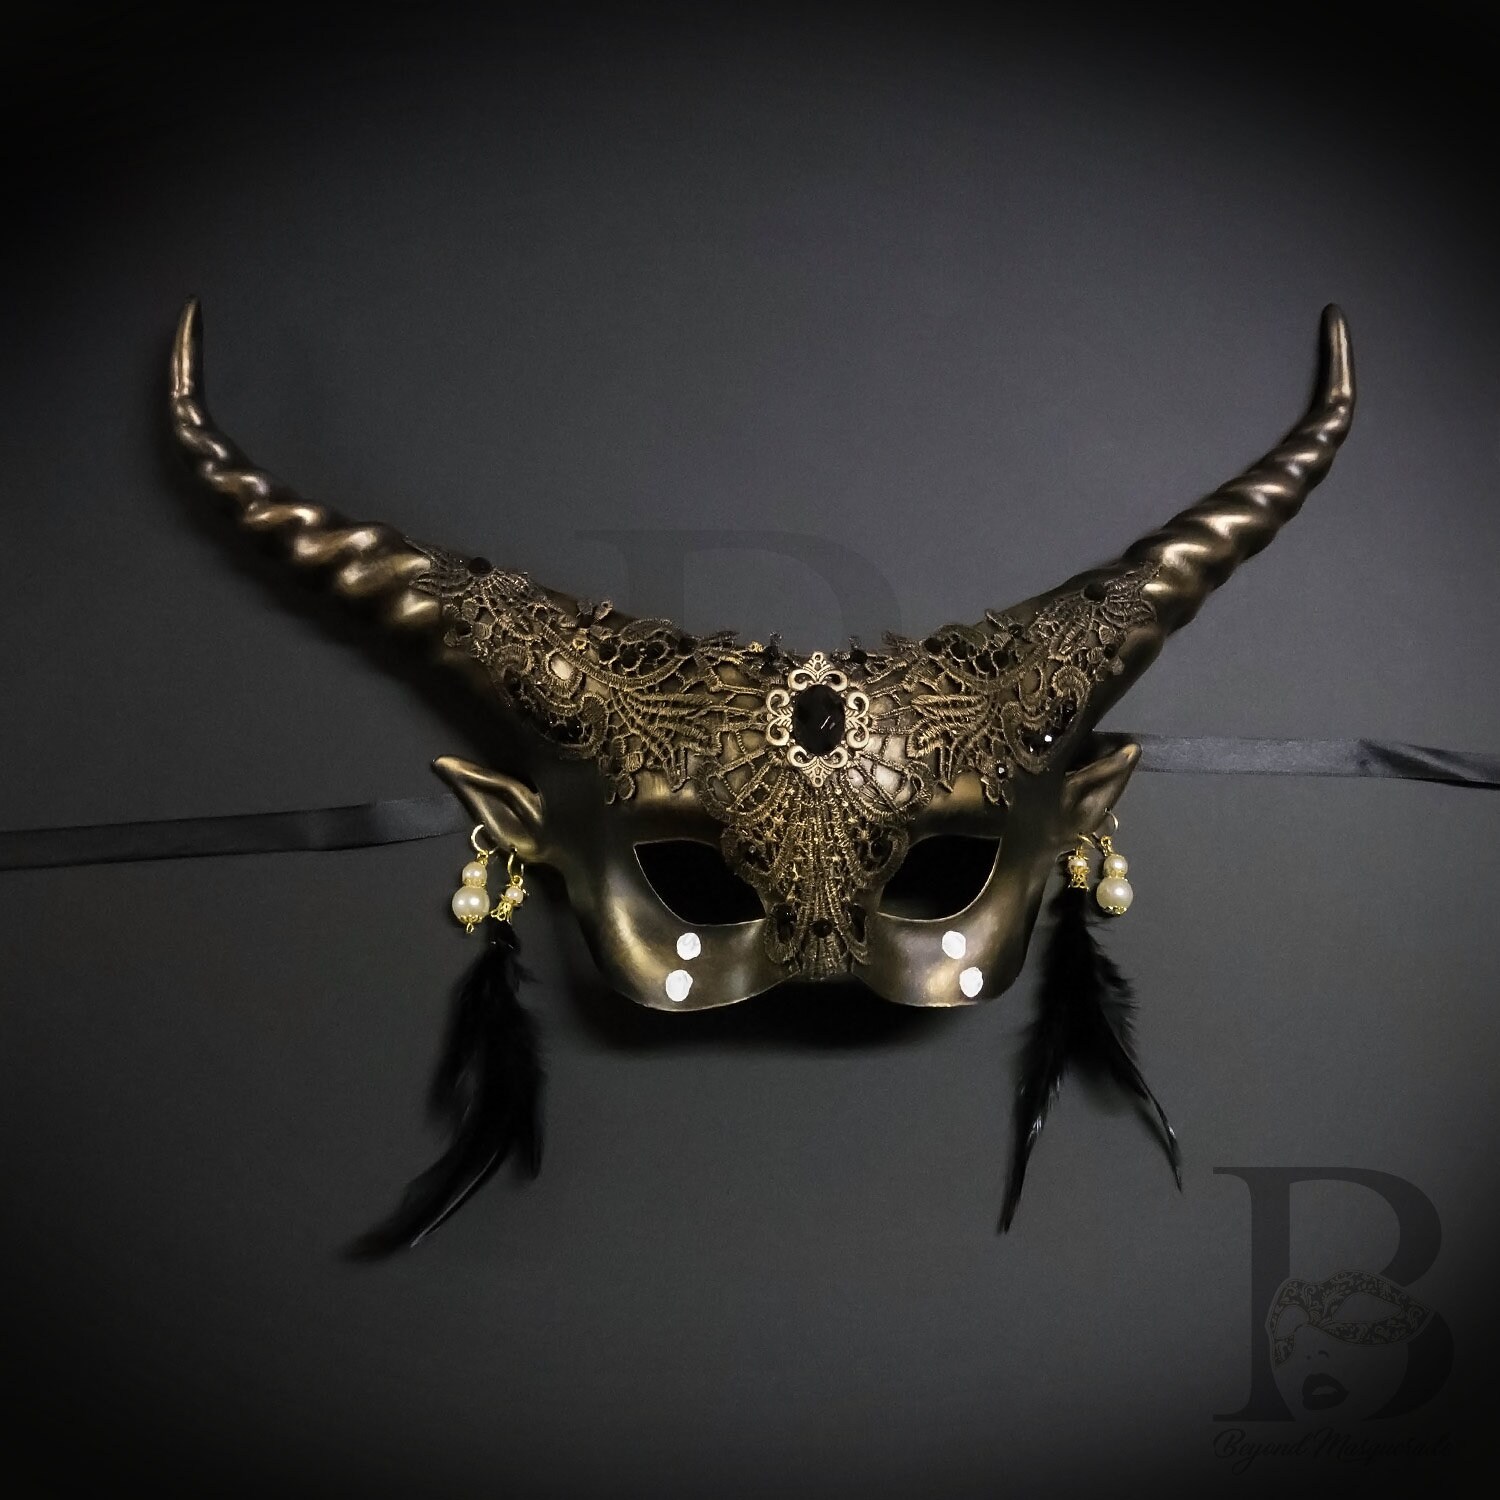 Ram Mask, Masquerade Masks, Whimsical Ethereal Mask With Feather Earrings